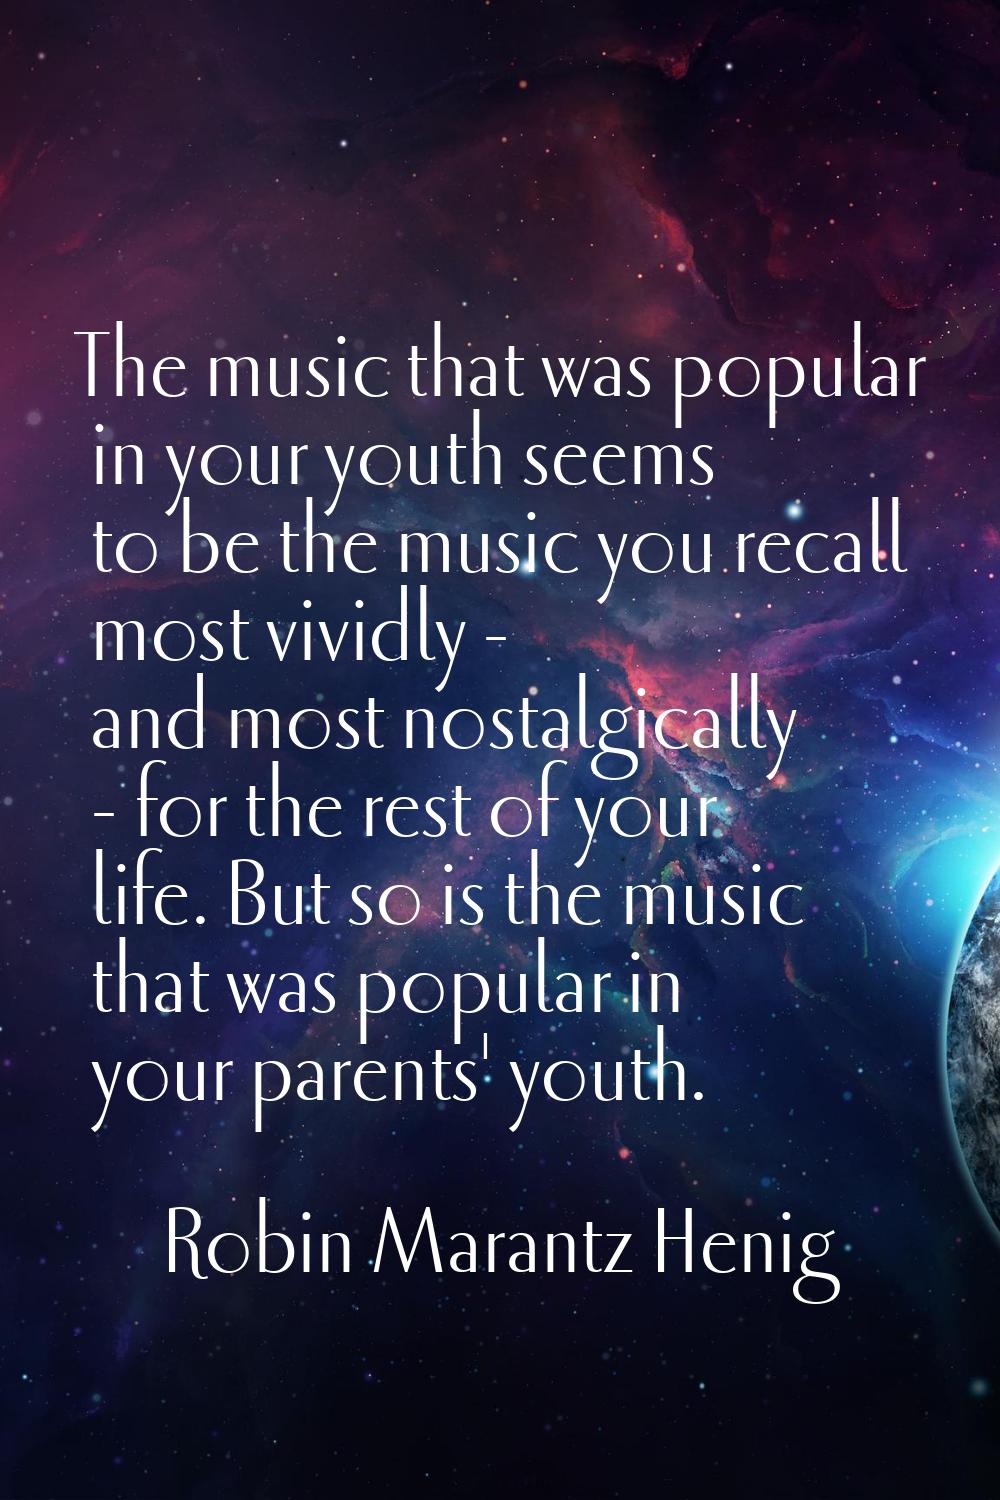 The music that was popular in your youth seems to be the music you recall most vividly - and most n